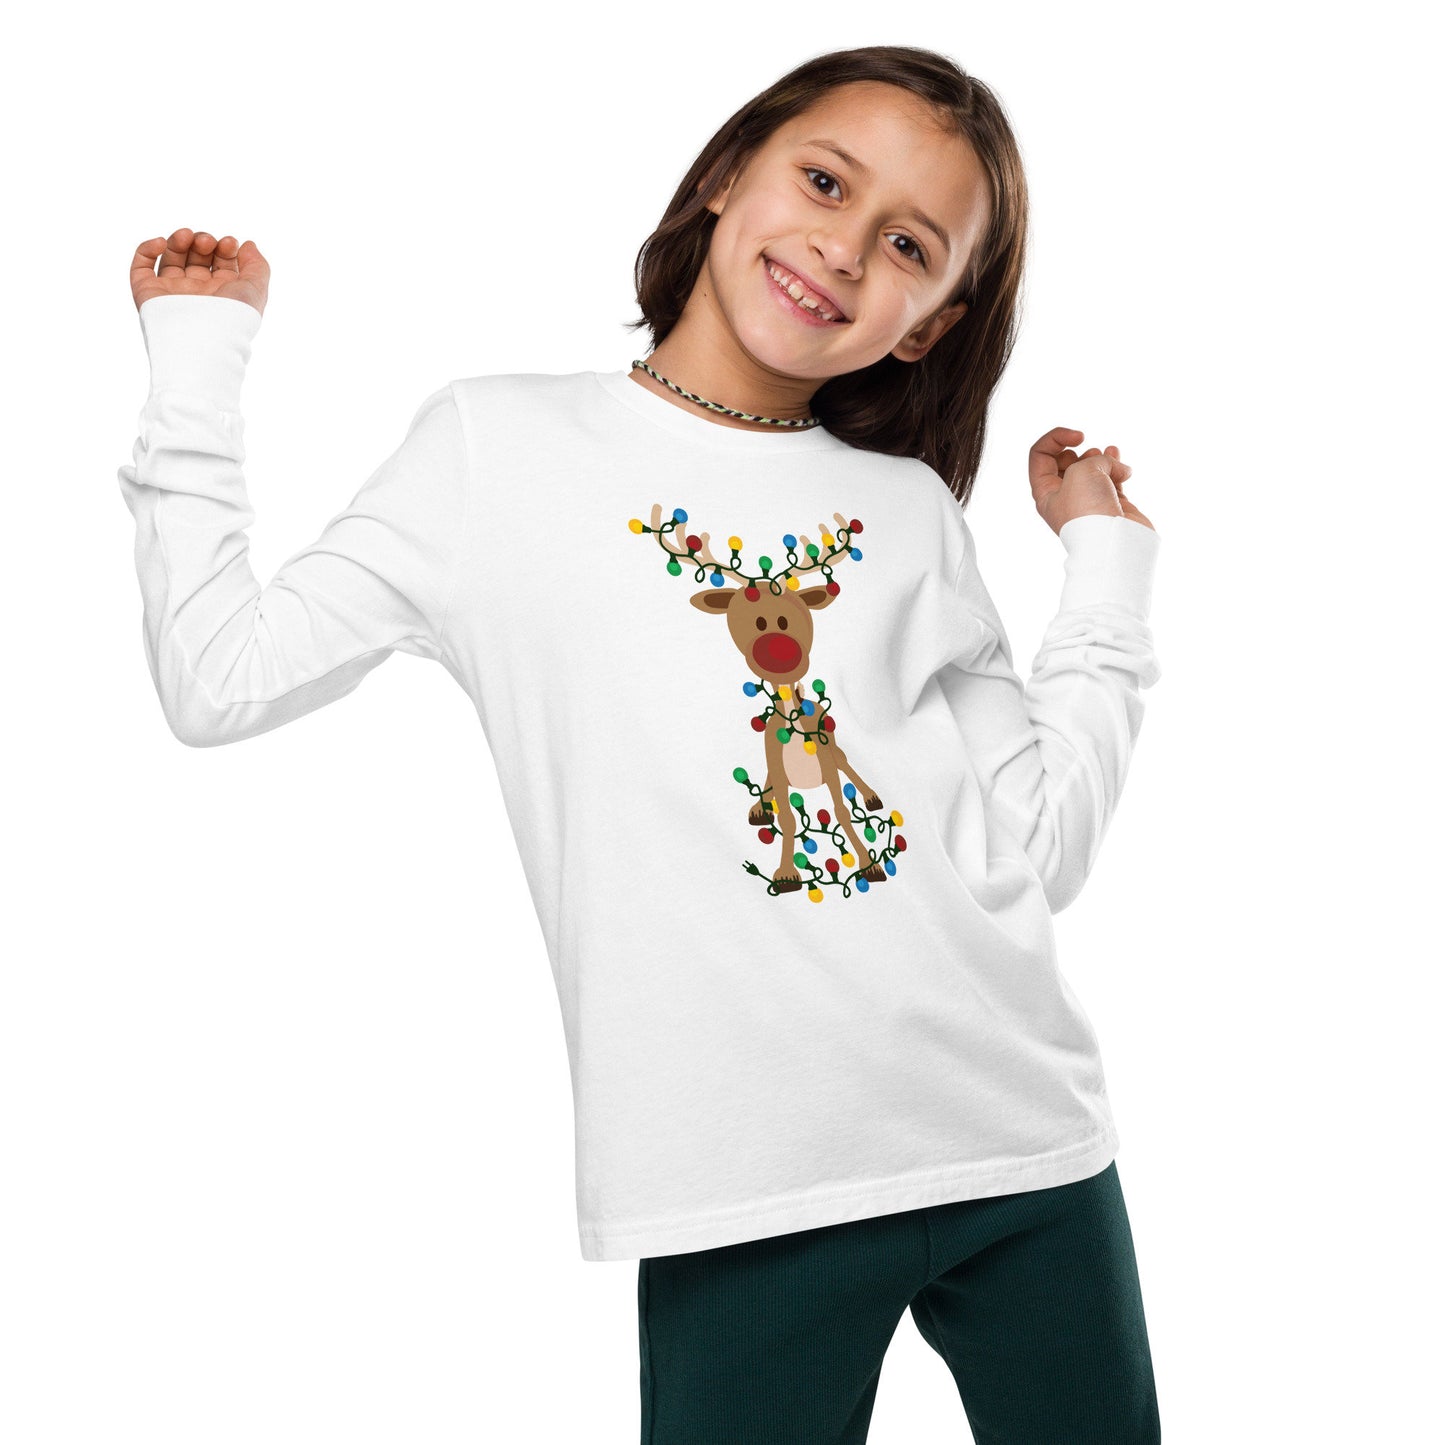 Reindeer Covered in Christmas Lights - Funny Christmas - Youth long sleeve tee